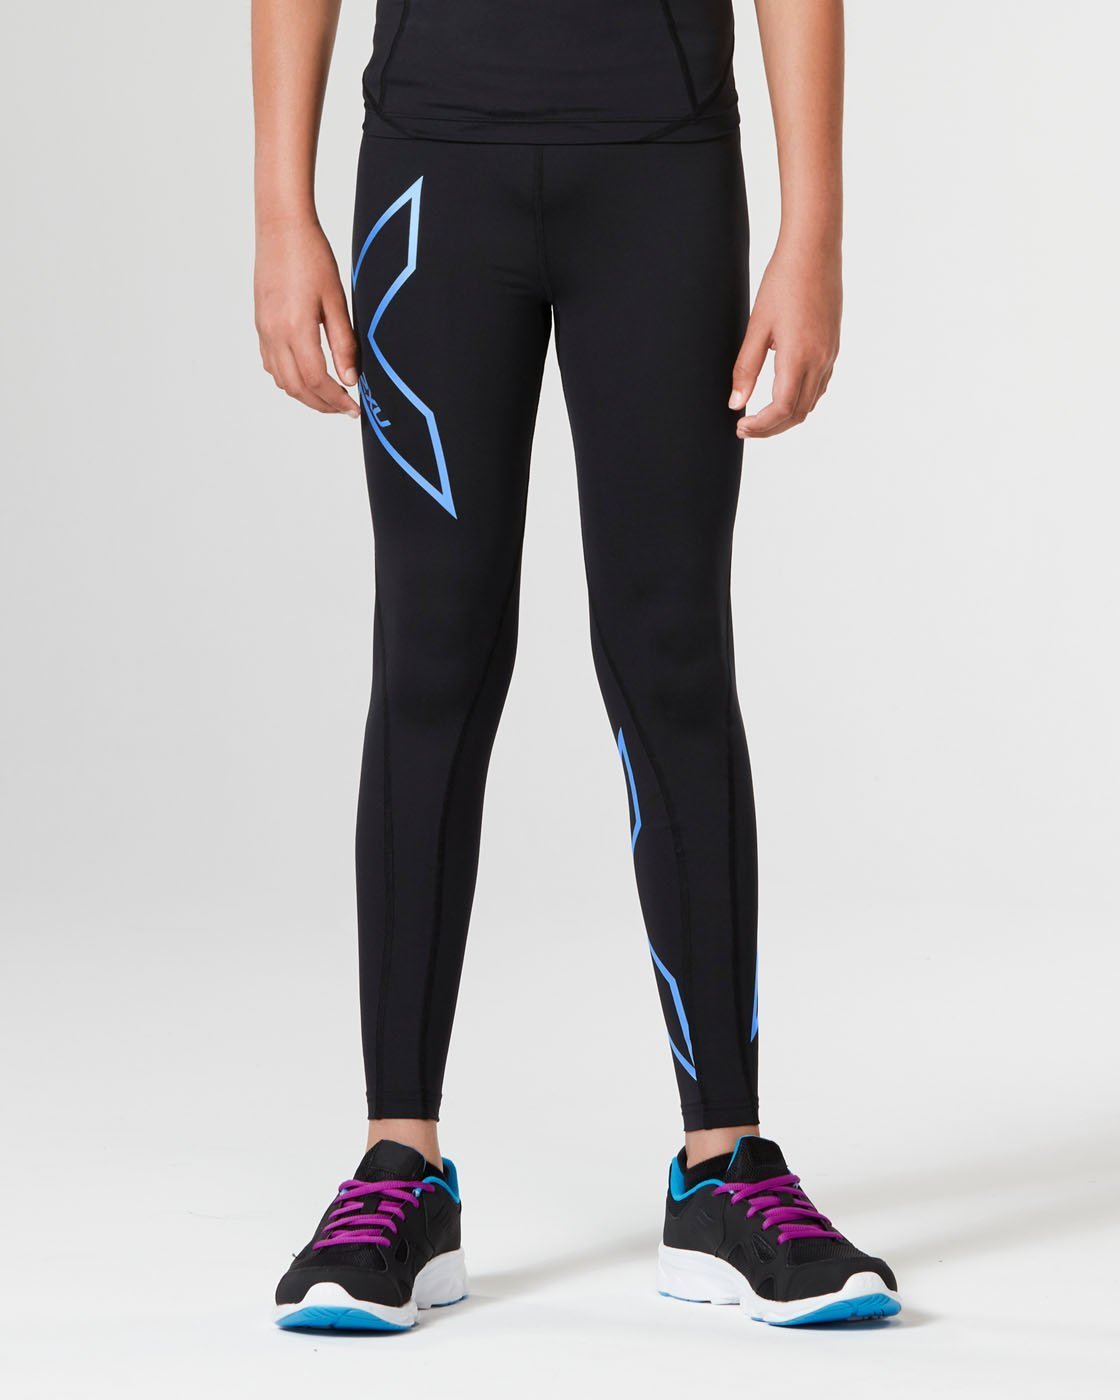 2XU South Africa - Girls' Core Compression Tights - Black/Blue